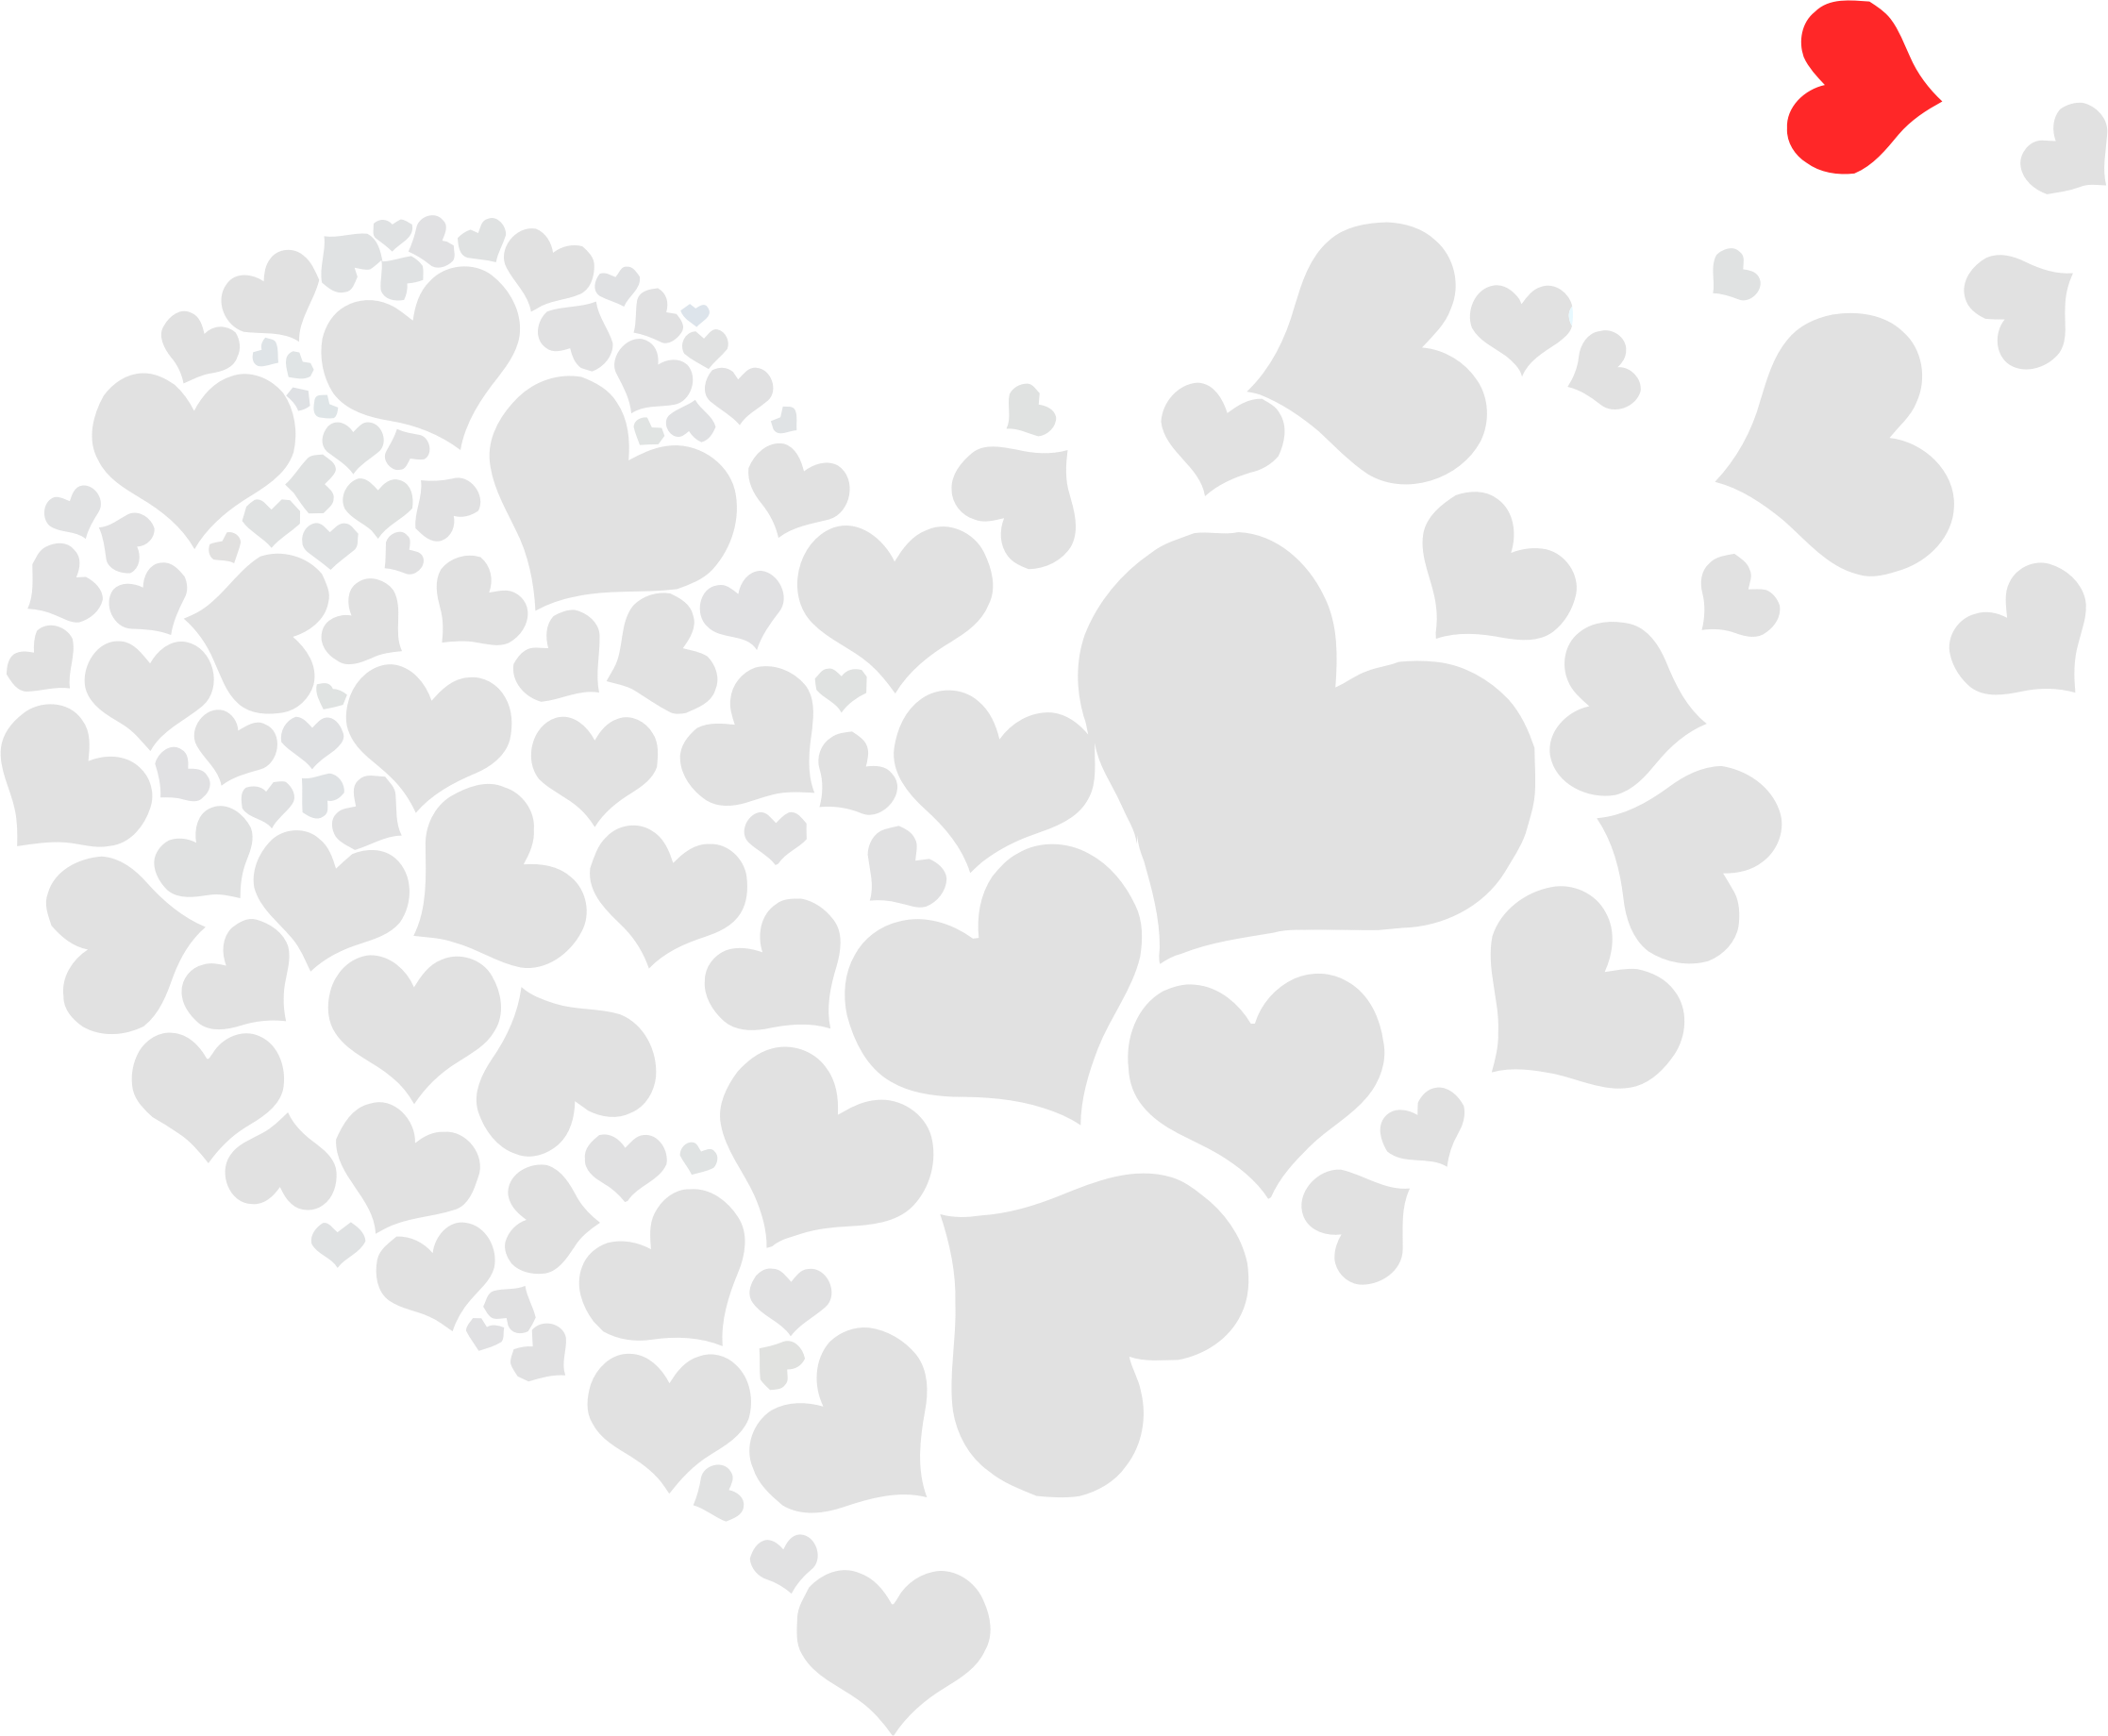 Torn no background by. Honeycomb clipart heart